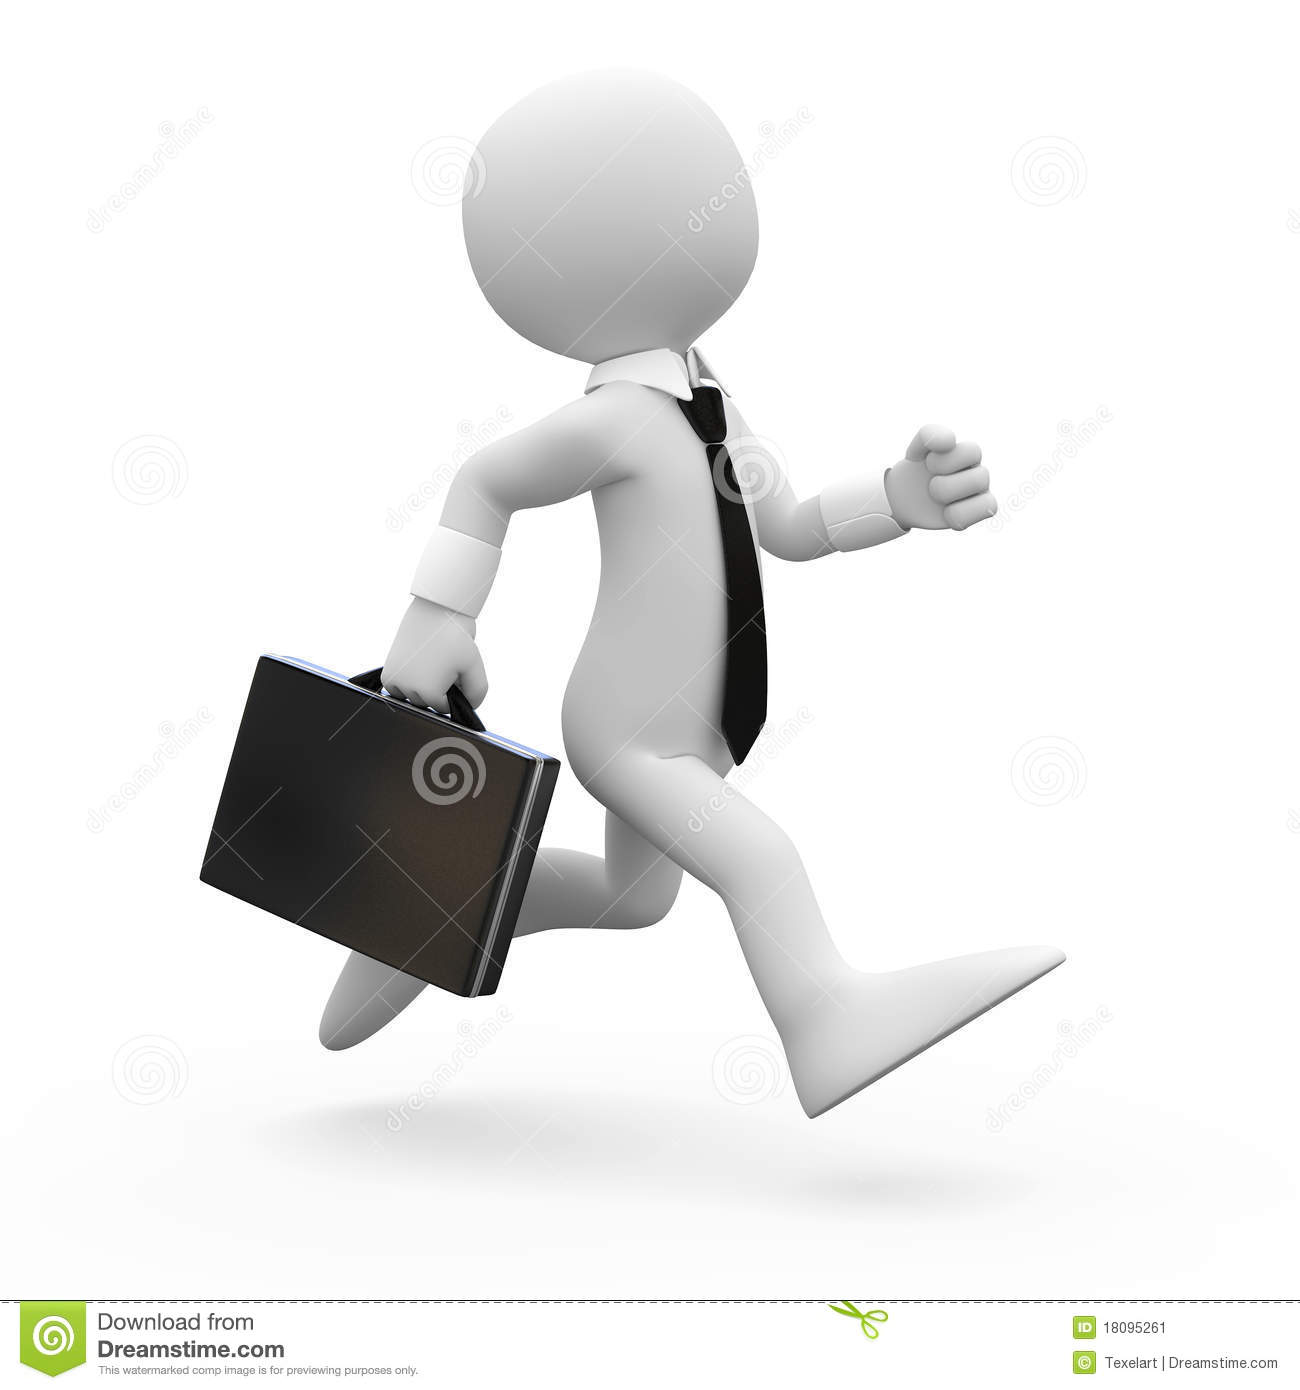 Man Running With A Briefcase In Hand Stock Image   Image  18095261